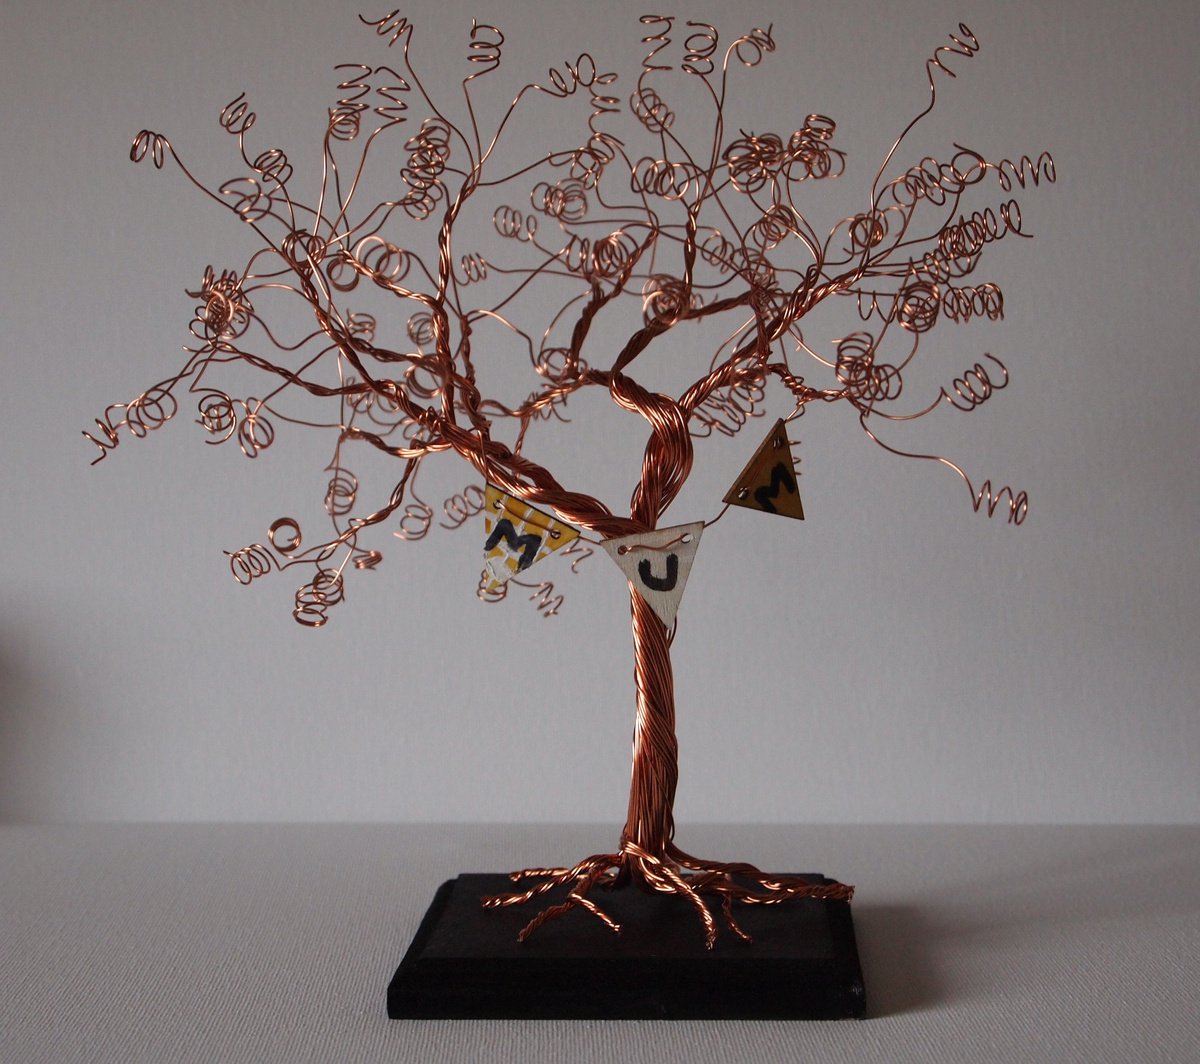 Copper wire tree sculpture with bunting by Steph Morgan